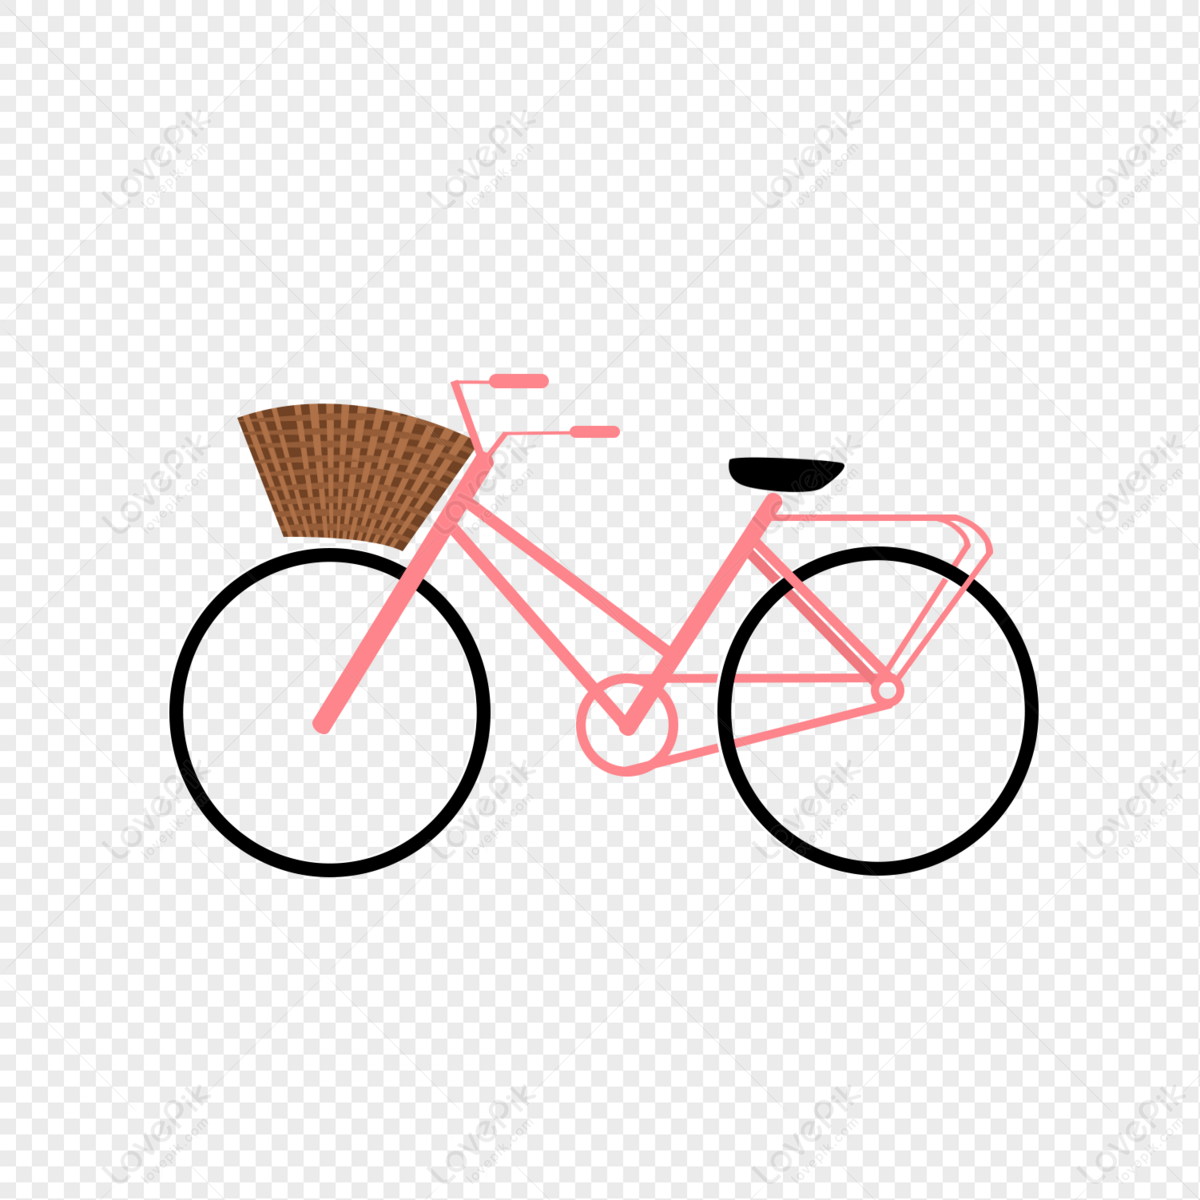 Pink Cartoon Bicycle PNG Hd Transparent Image And Clipart Image For Free  Download - Lovepik | 401172864